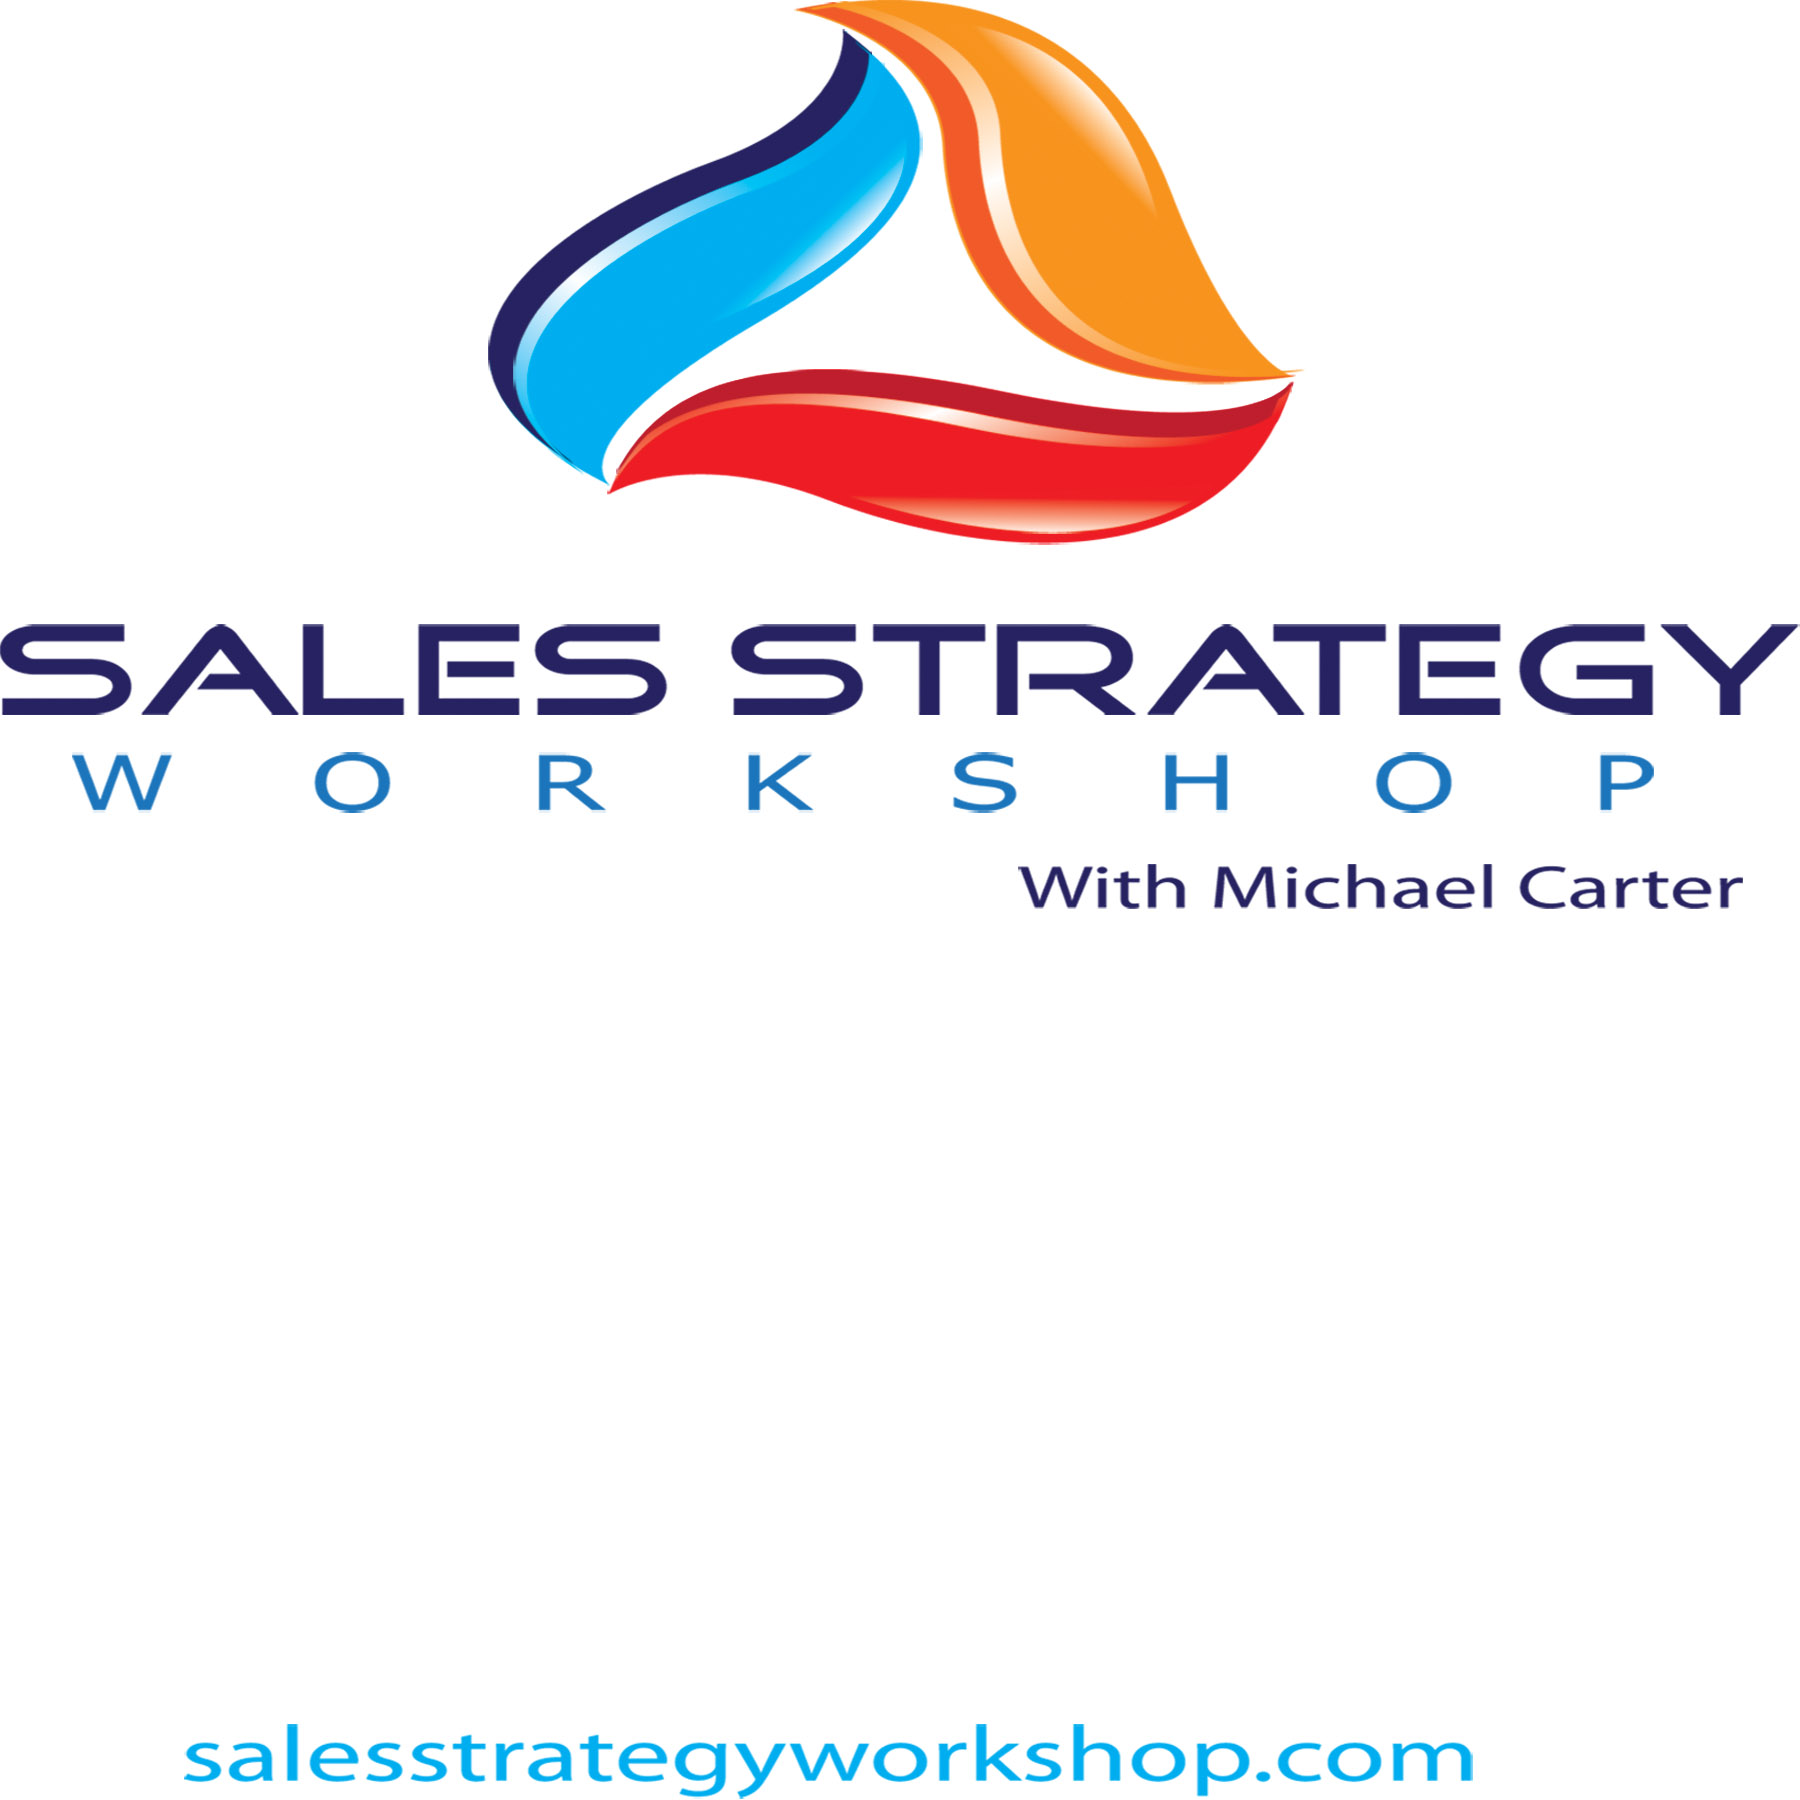 Sales Strategy Workshop sales training podcast and blog